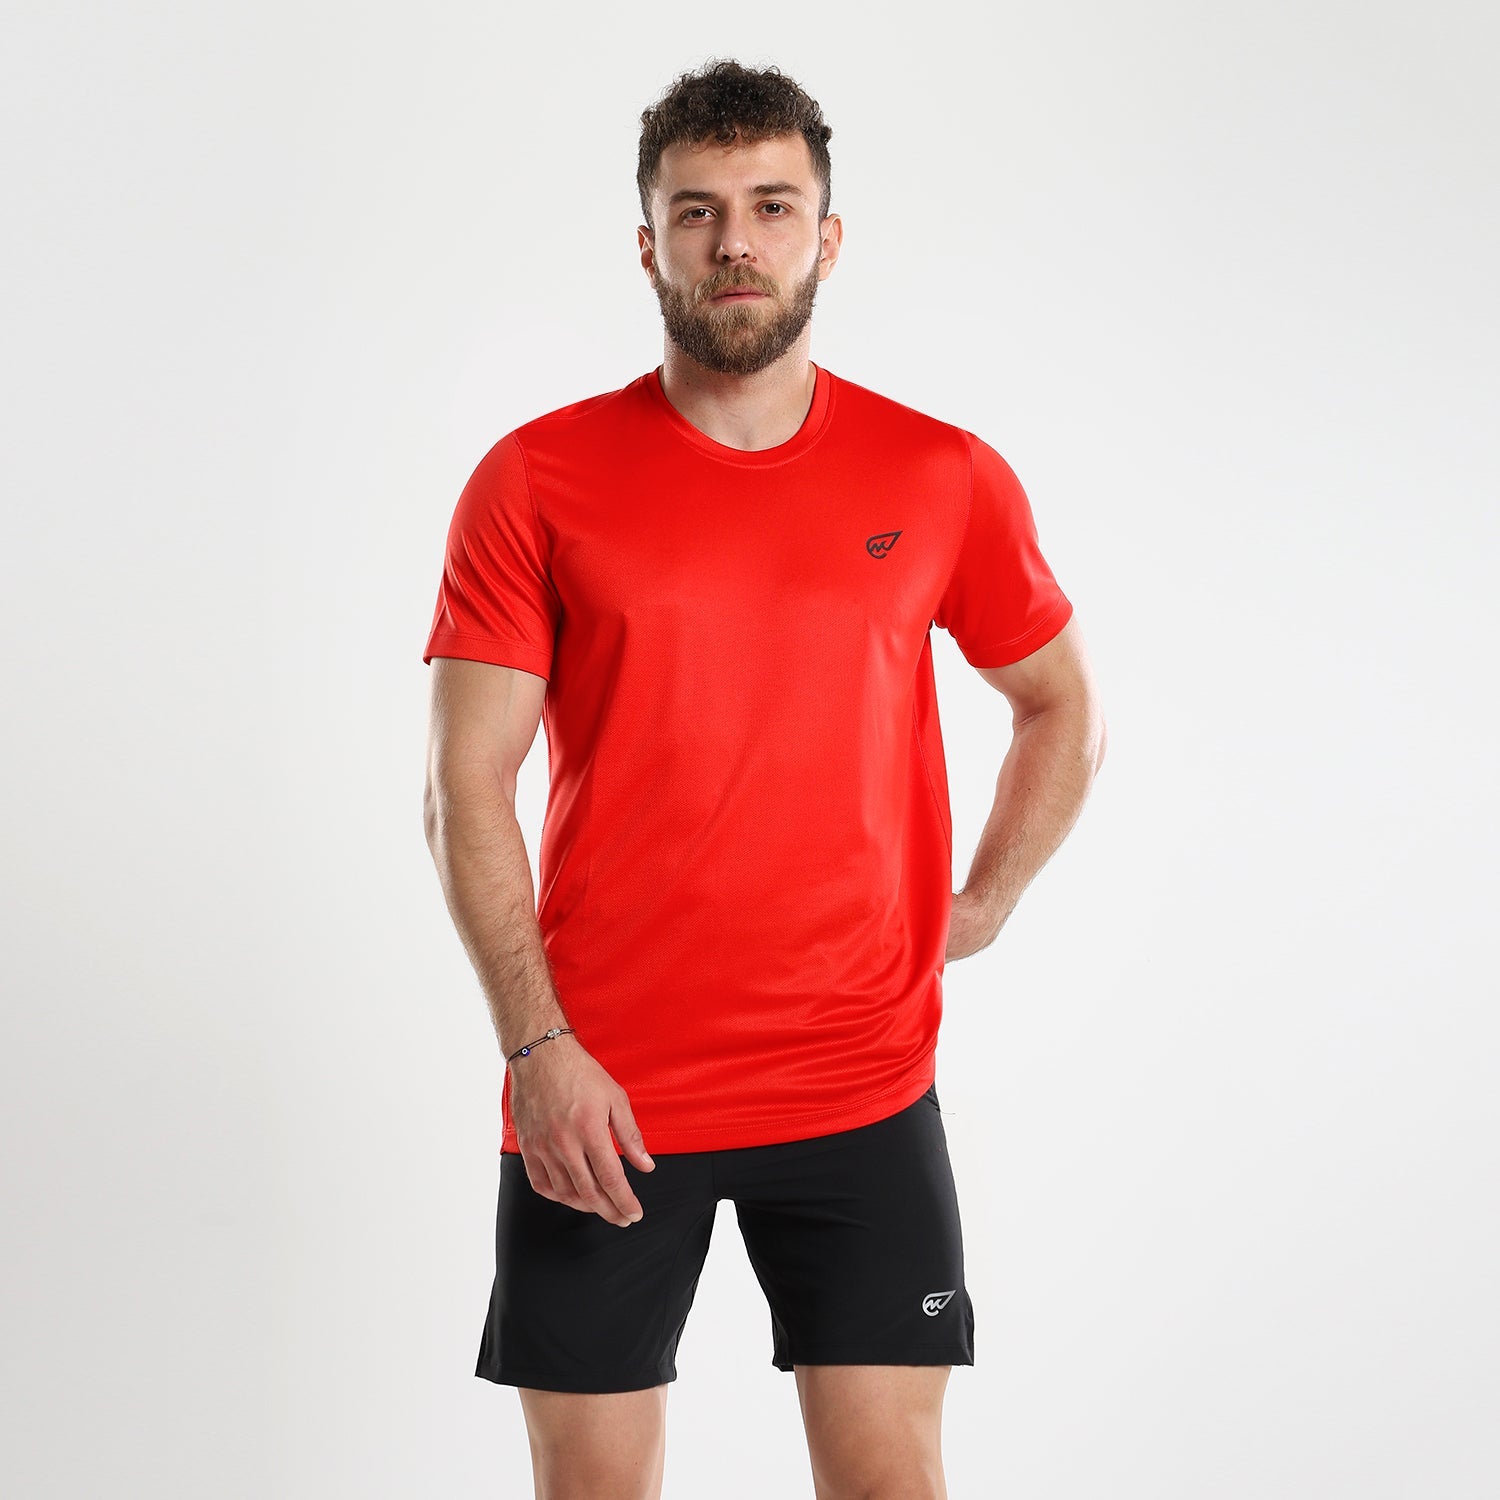 Training T-shirt in High Risk Red